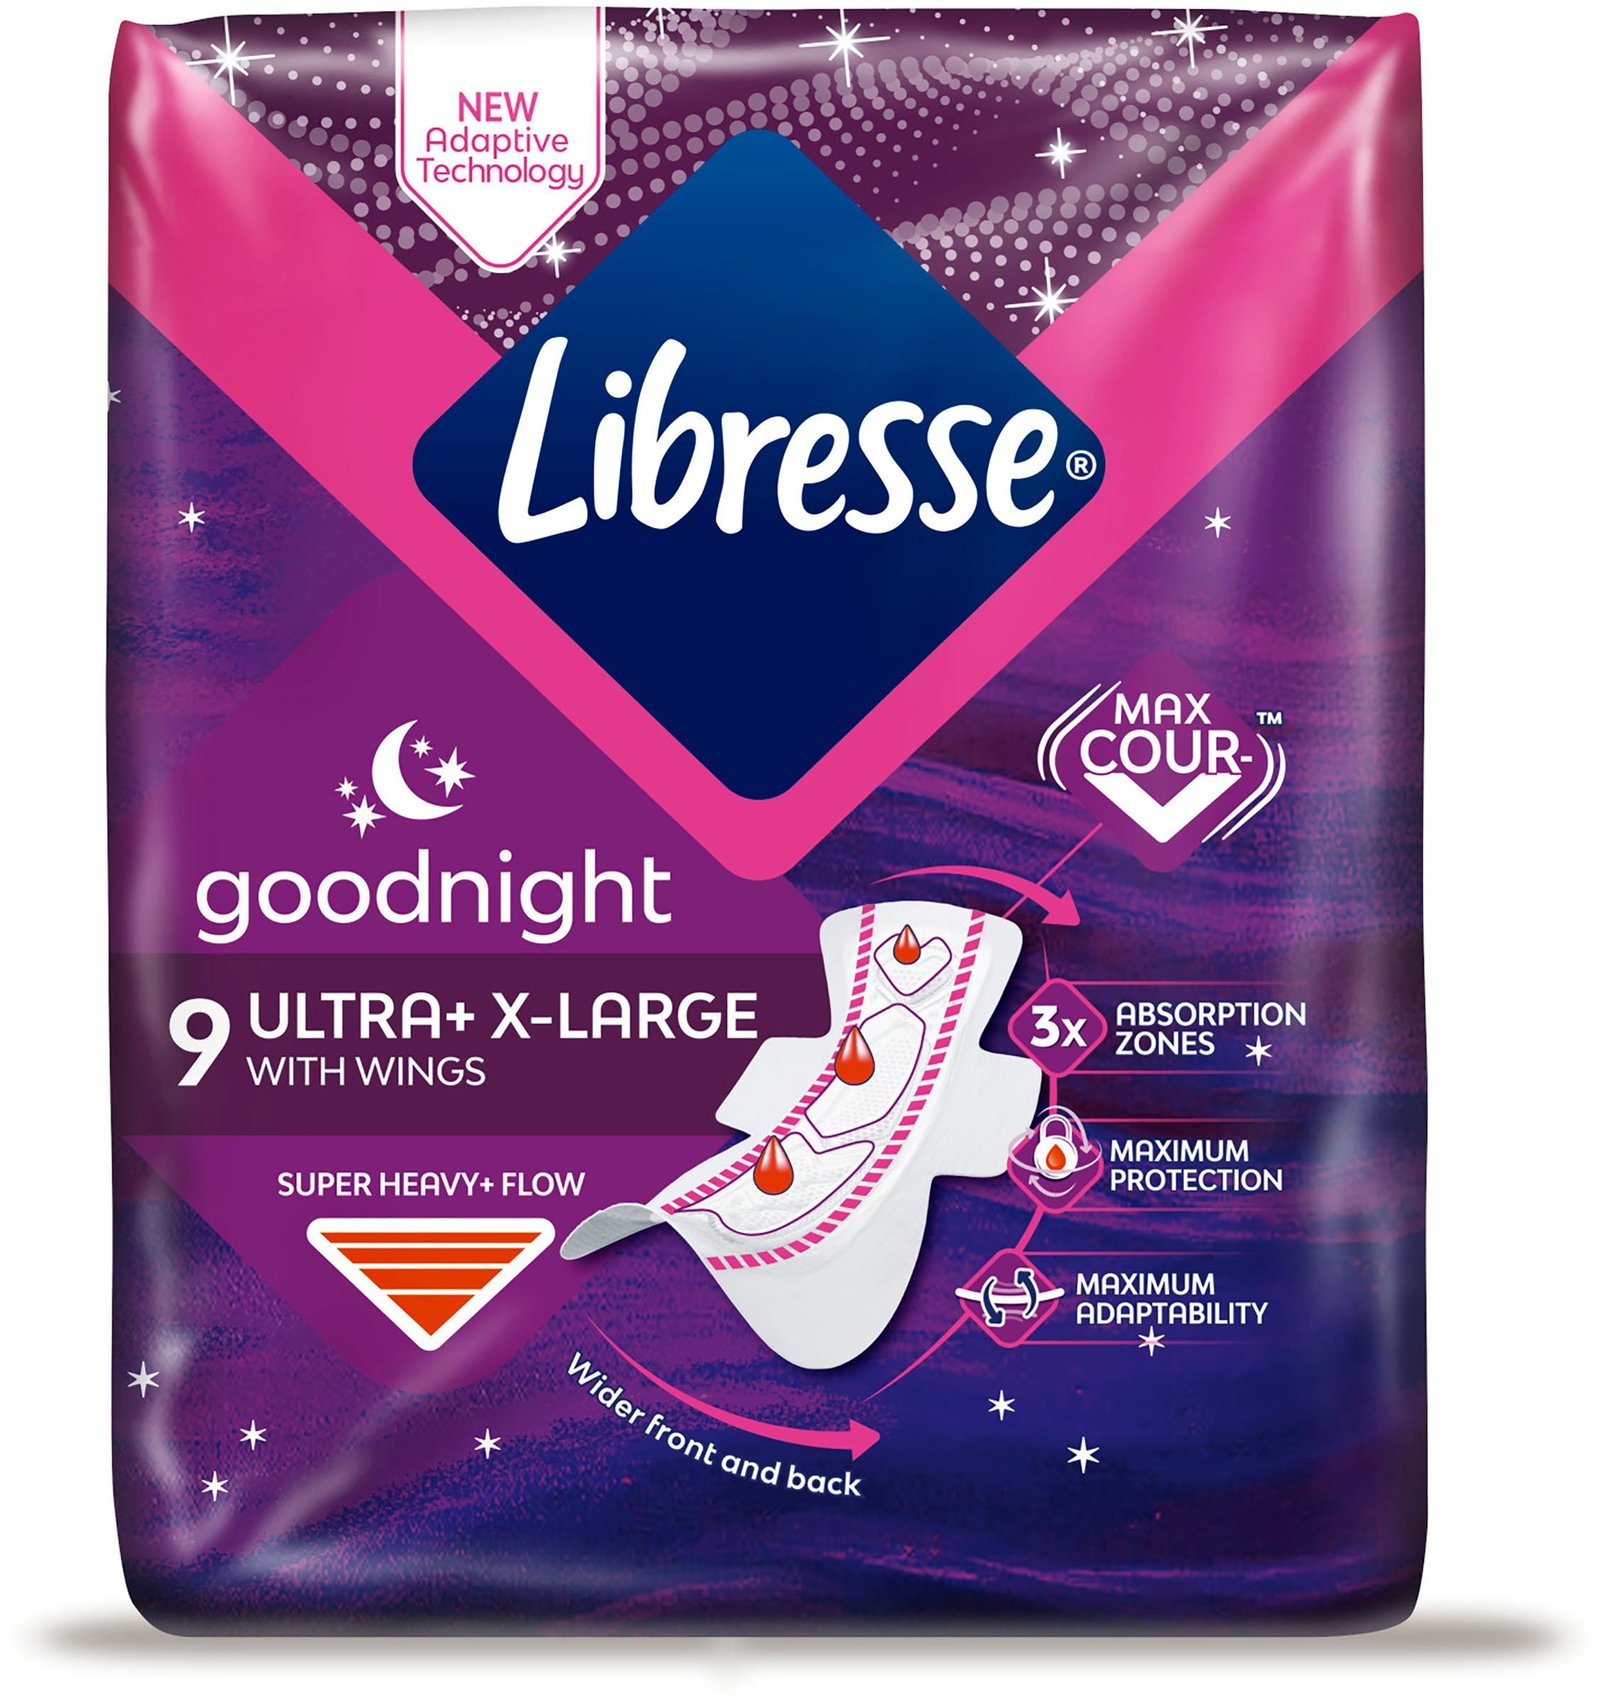 Libresse Goodnight Extra Ultra+ X-Large 9 st